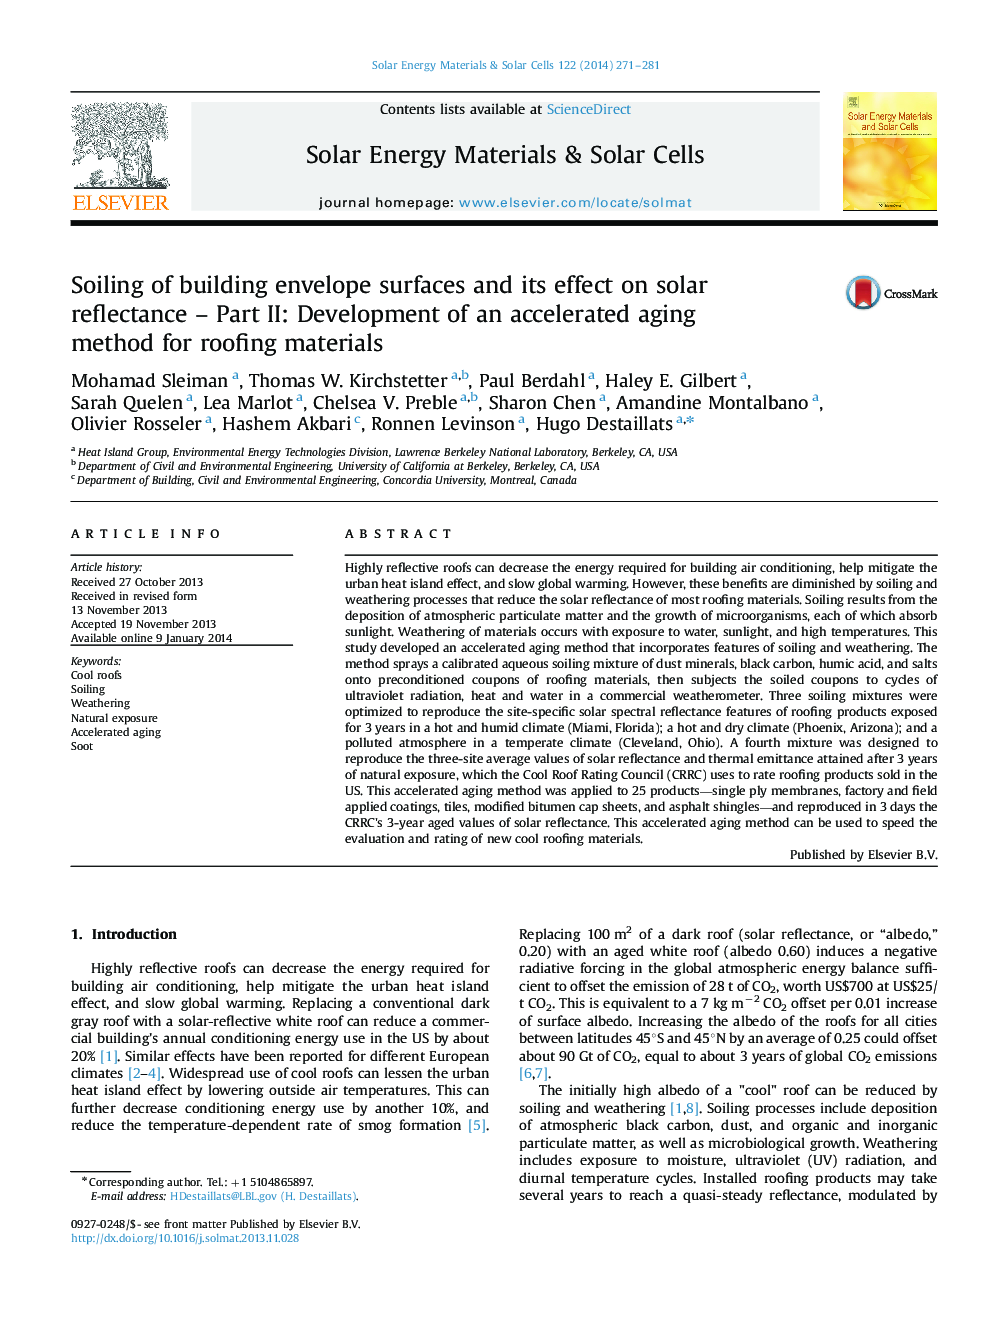 Soiling of building envelope surfaces and its effect on solar reflectance - Part II: Development of an accelerated aging method for roofing materials